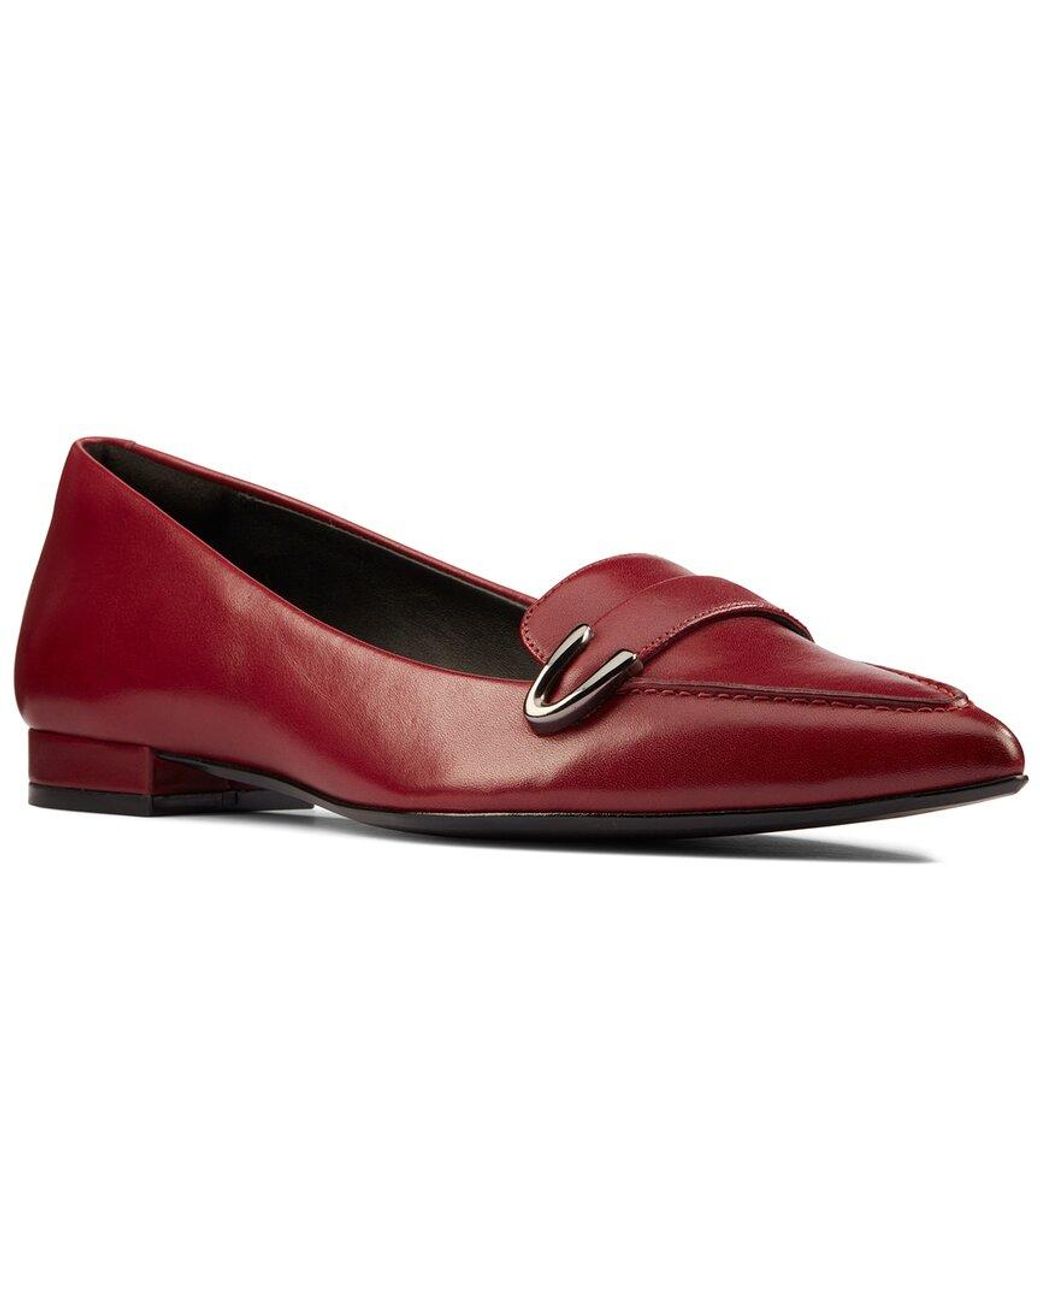 Clarks Laina Leather Shoe in Red | Lyst